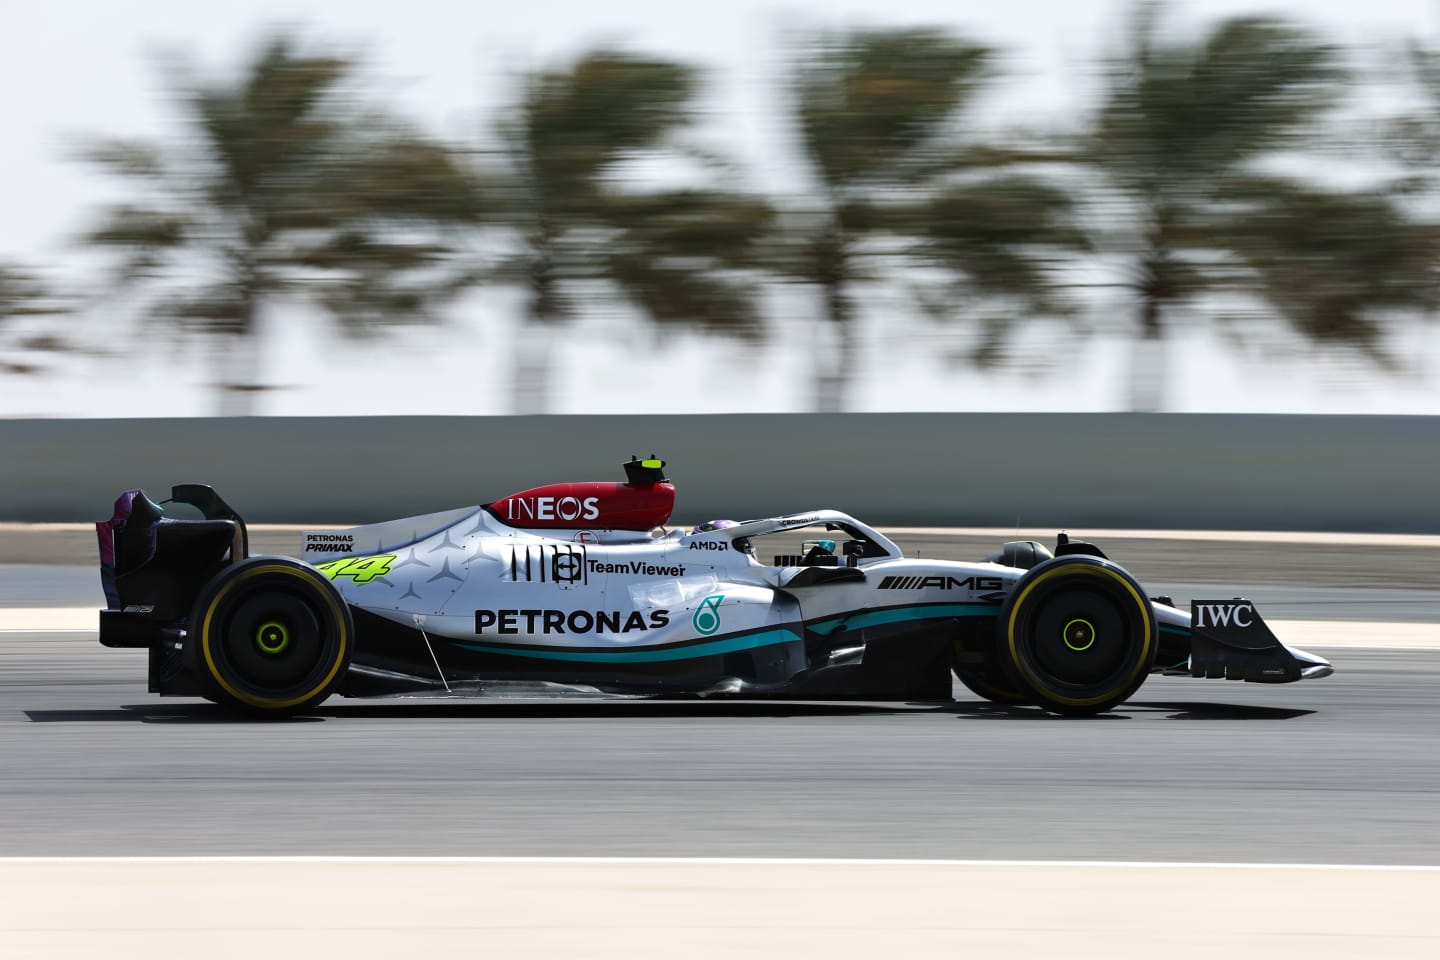 BAHRAIN, BAHRAIN - MARCH 12: Lewis Hamilton of Great Britain driving the (44) Mercedes AMG Petronas F1 Team W13 on track during Day Three of F1 Testing at Bahrain International Circuit on March 12, 2022 in Bahrain, Bahrain. (Photo by Lars Baron/Getty Images)